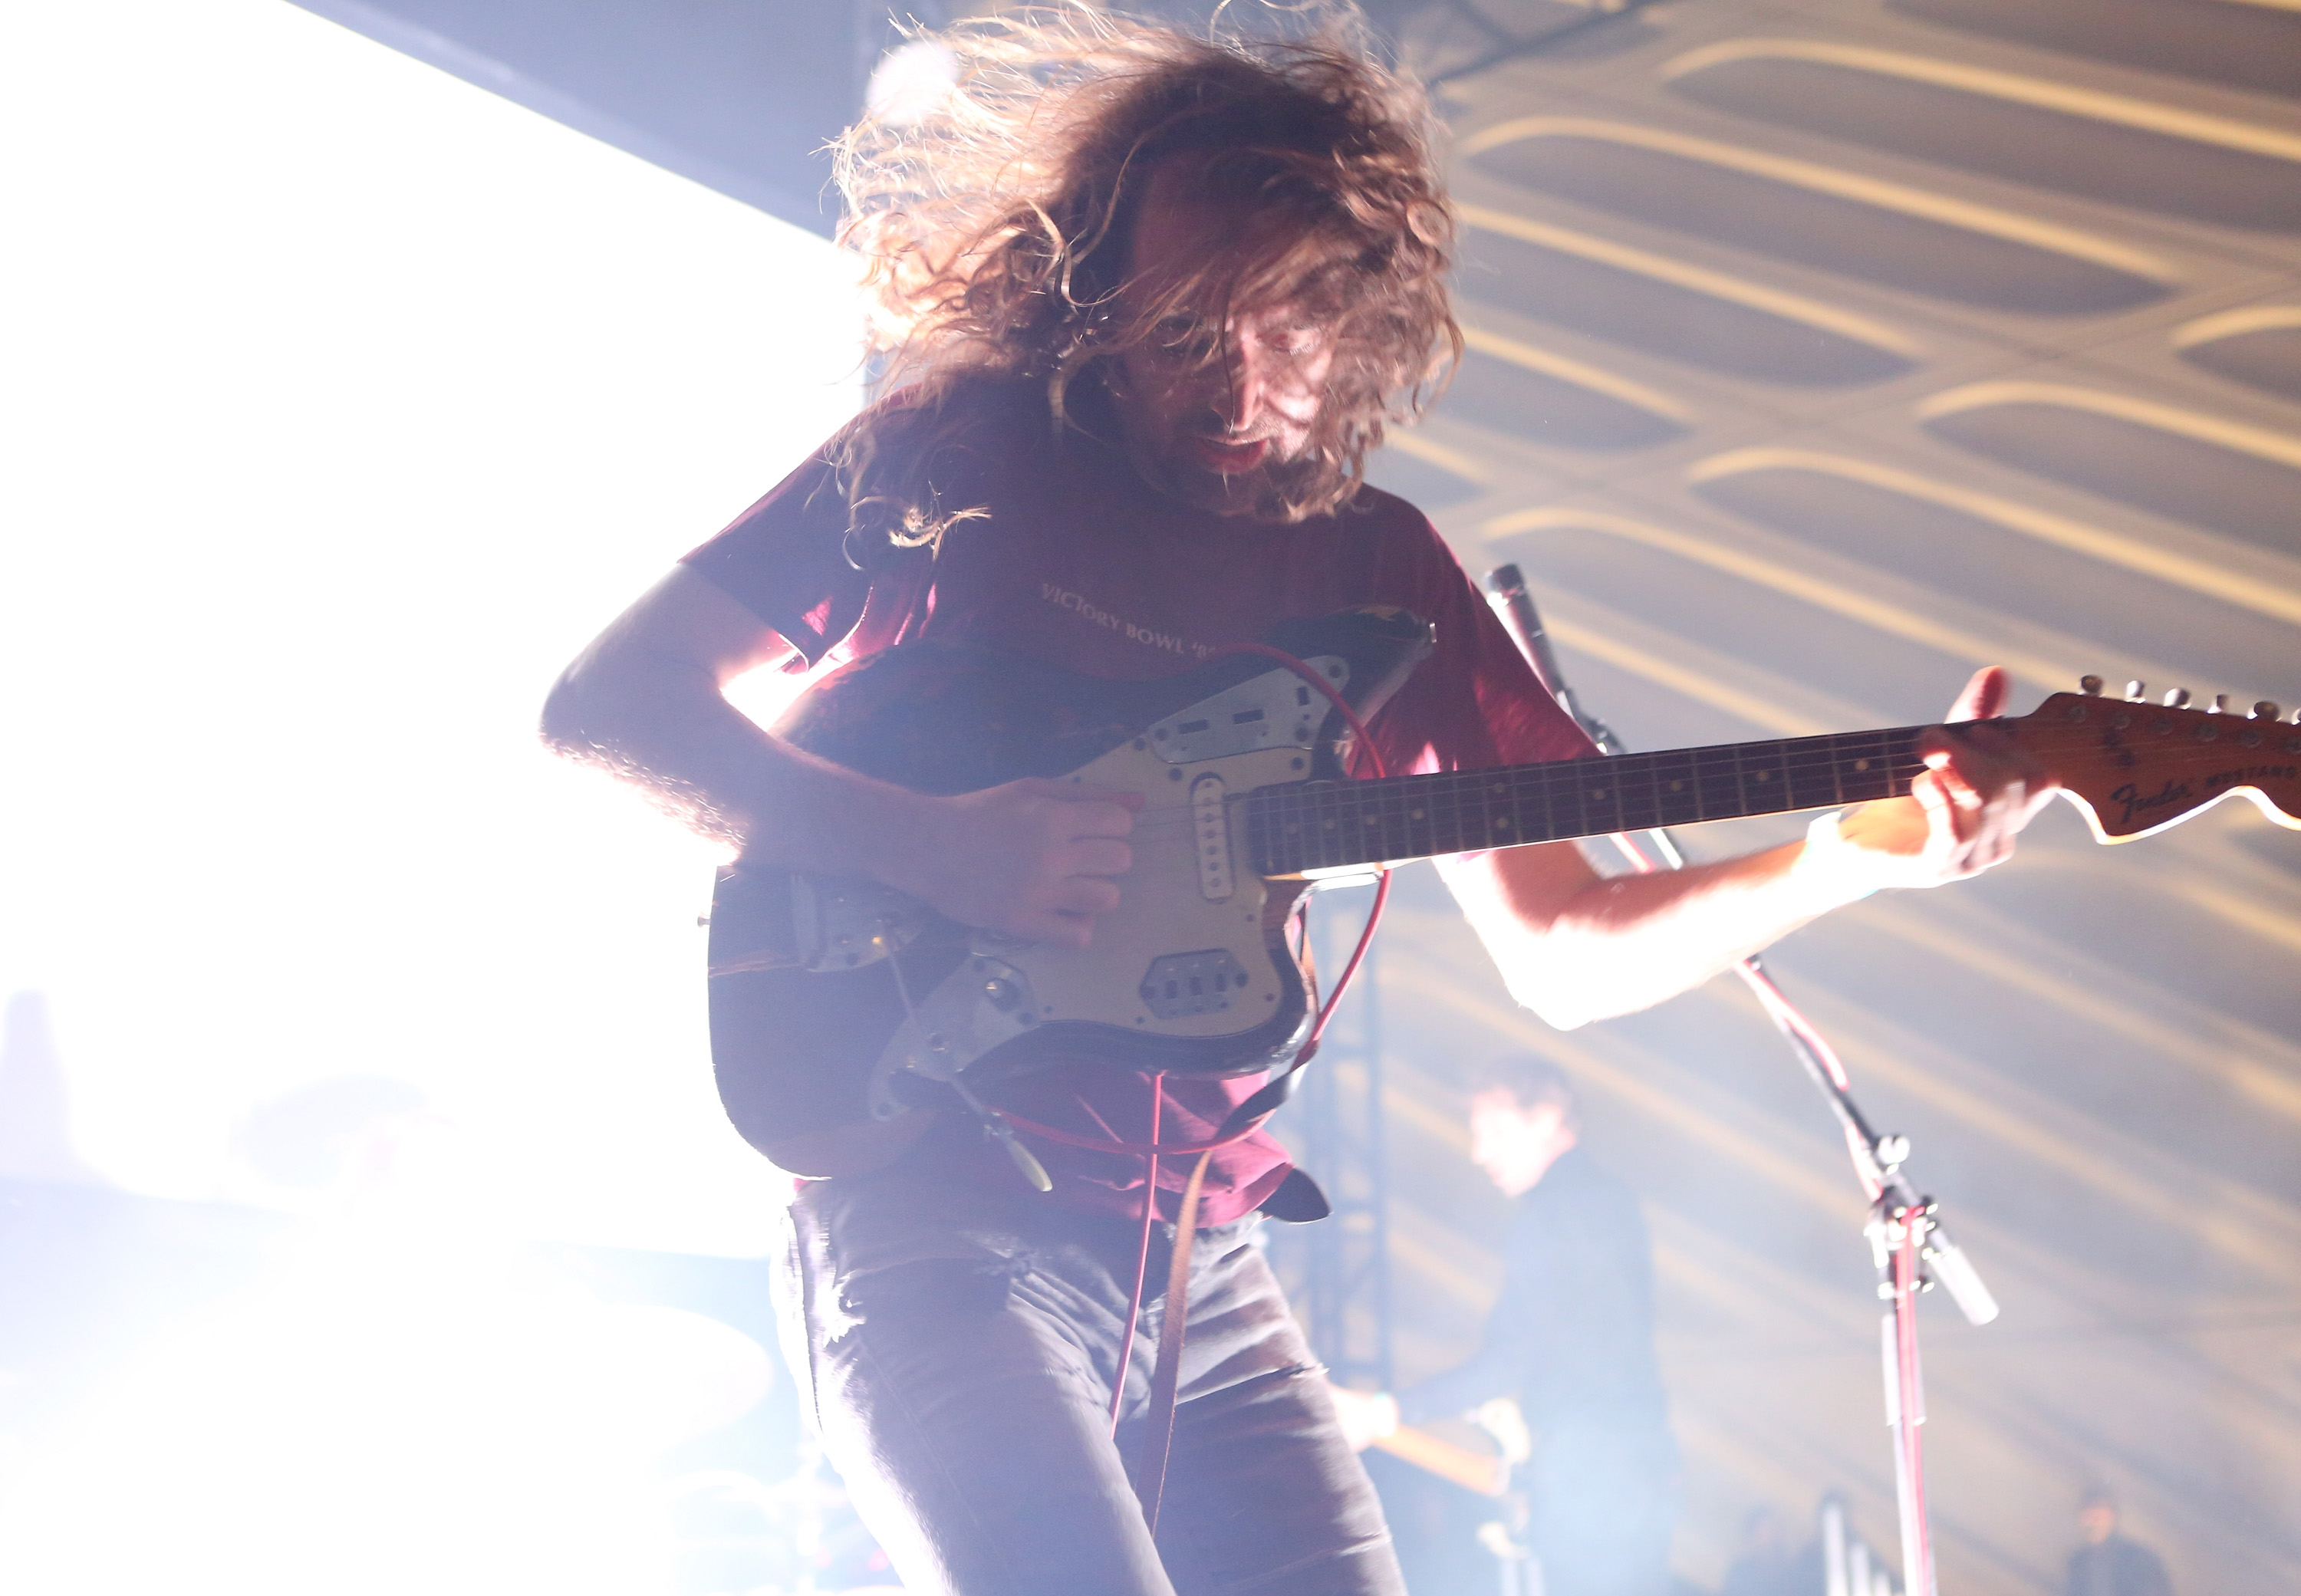 A Place to Bury Strangers Try 'Kicking Out Jams' on Their New 7"